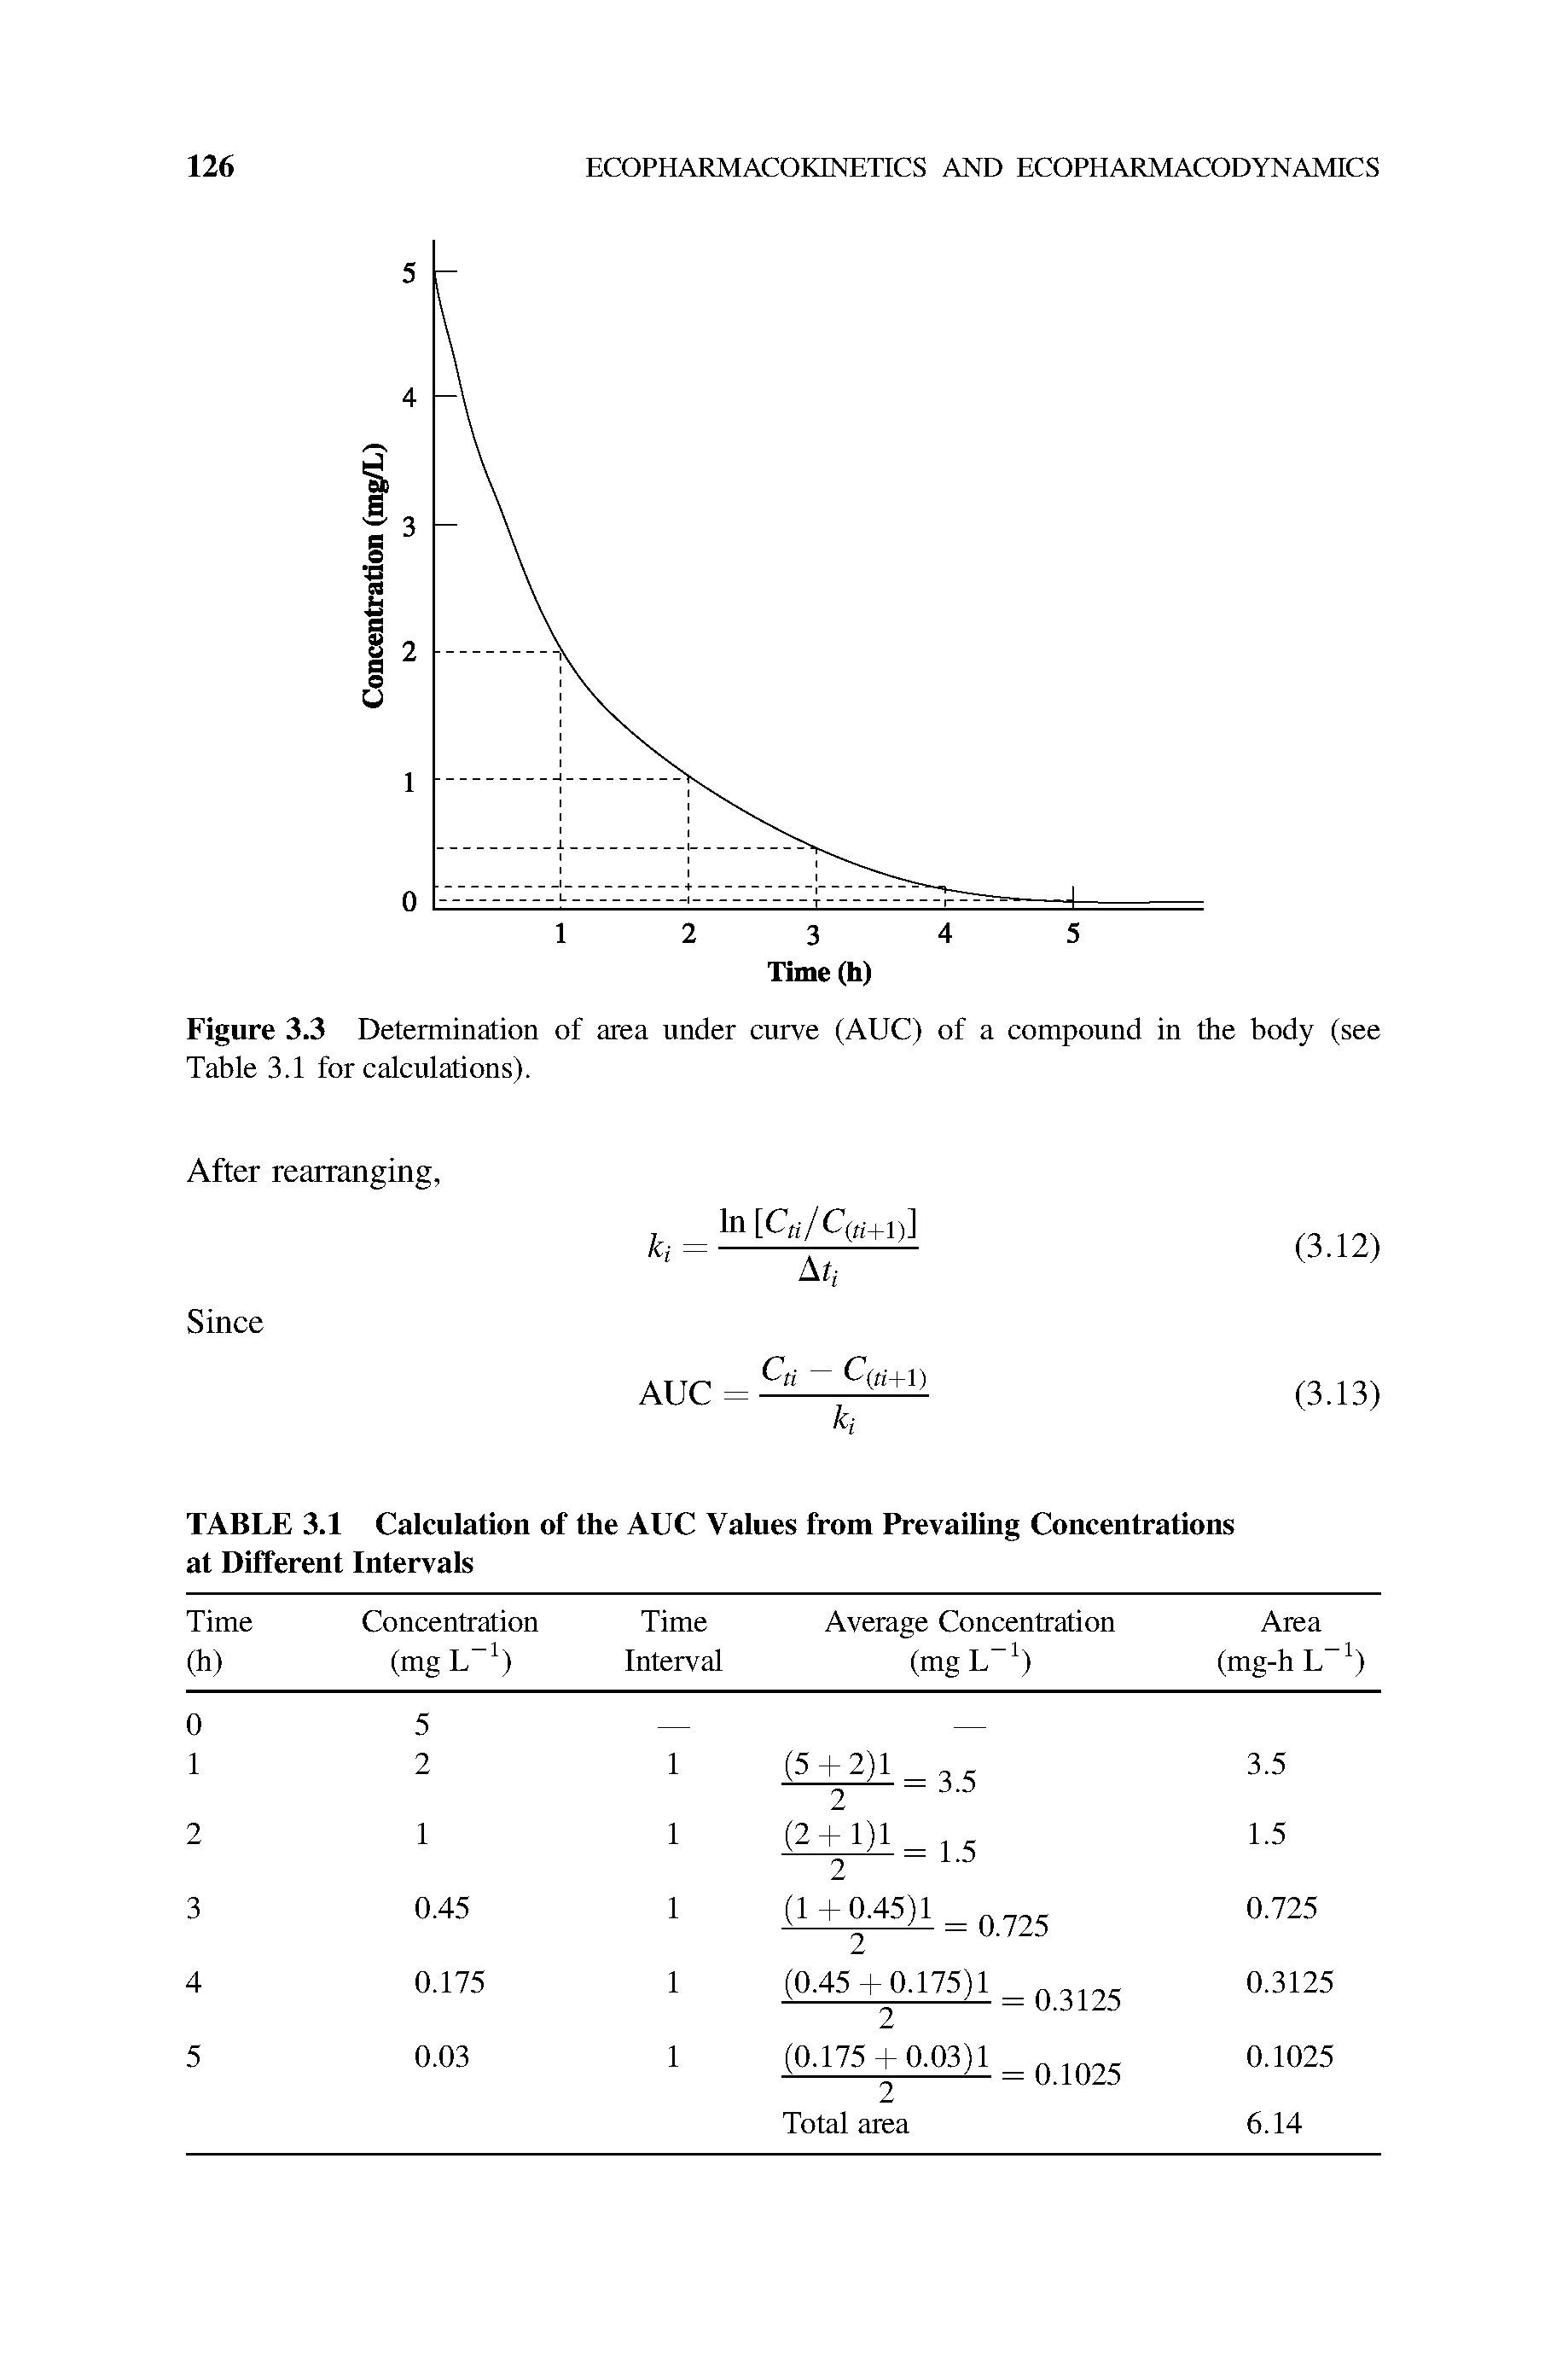 Figure 3.3 Determination of area under curve (AUC) of a compound in the body (see Table 3.1 for calculations).